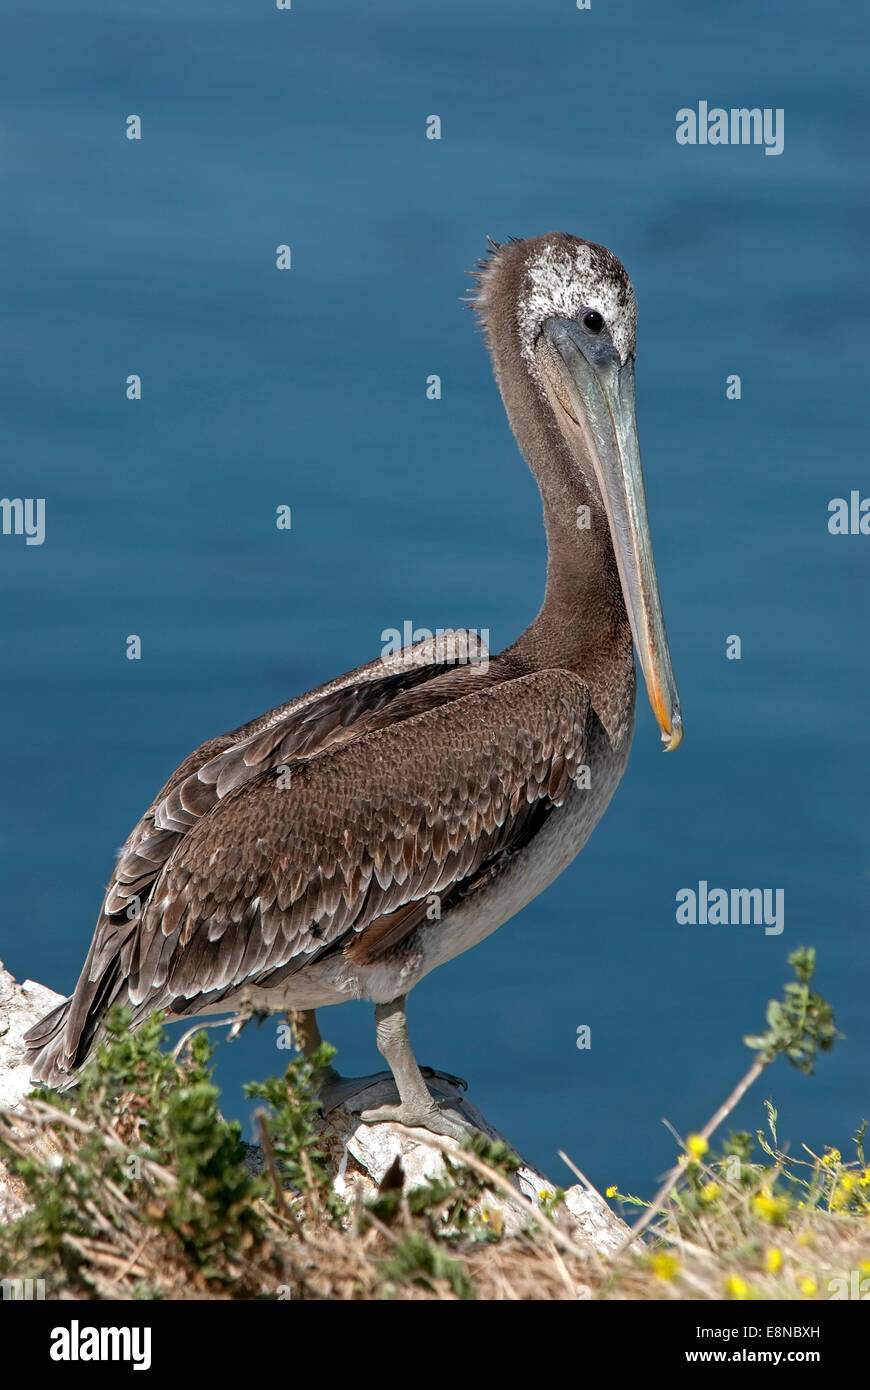 Brown Pelican, Side view Stock Photo